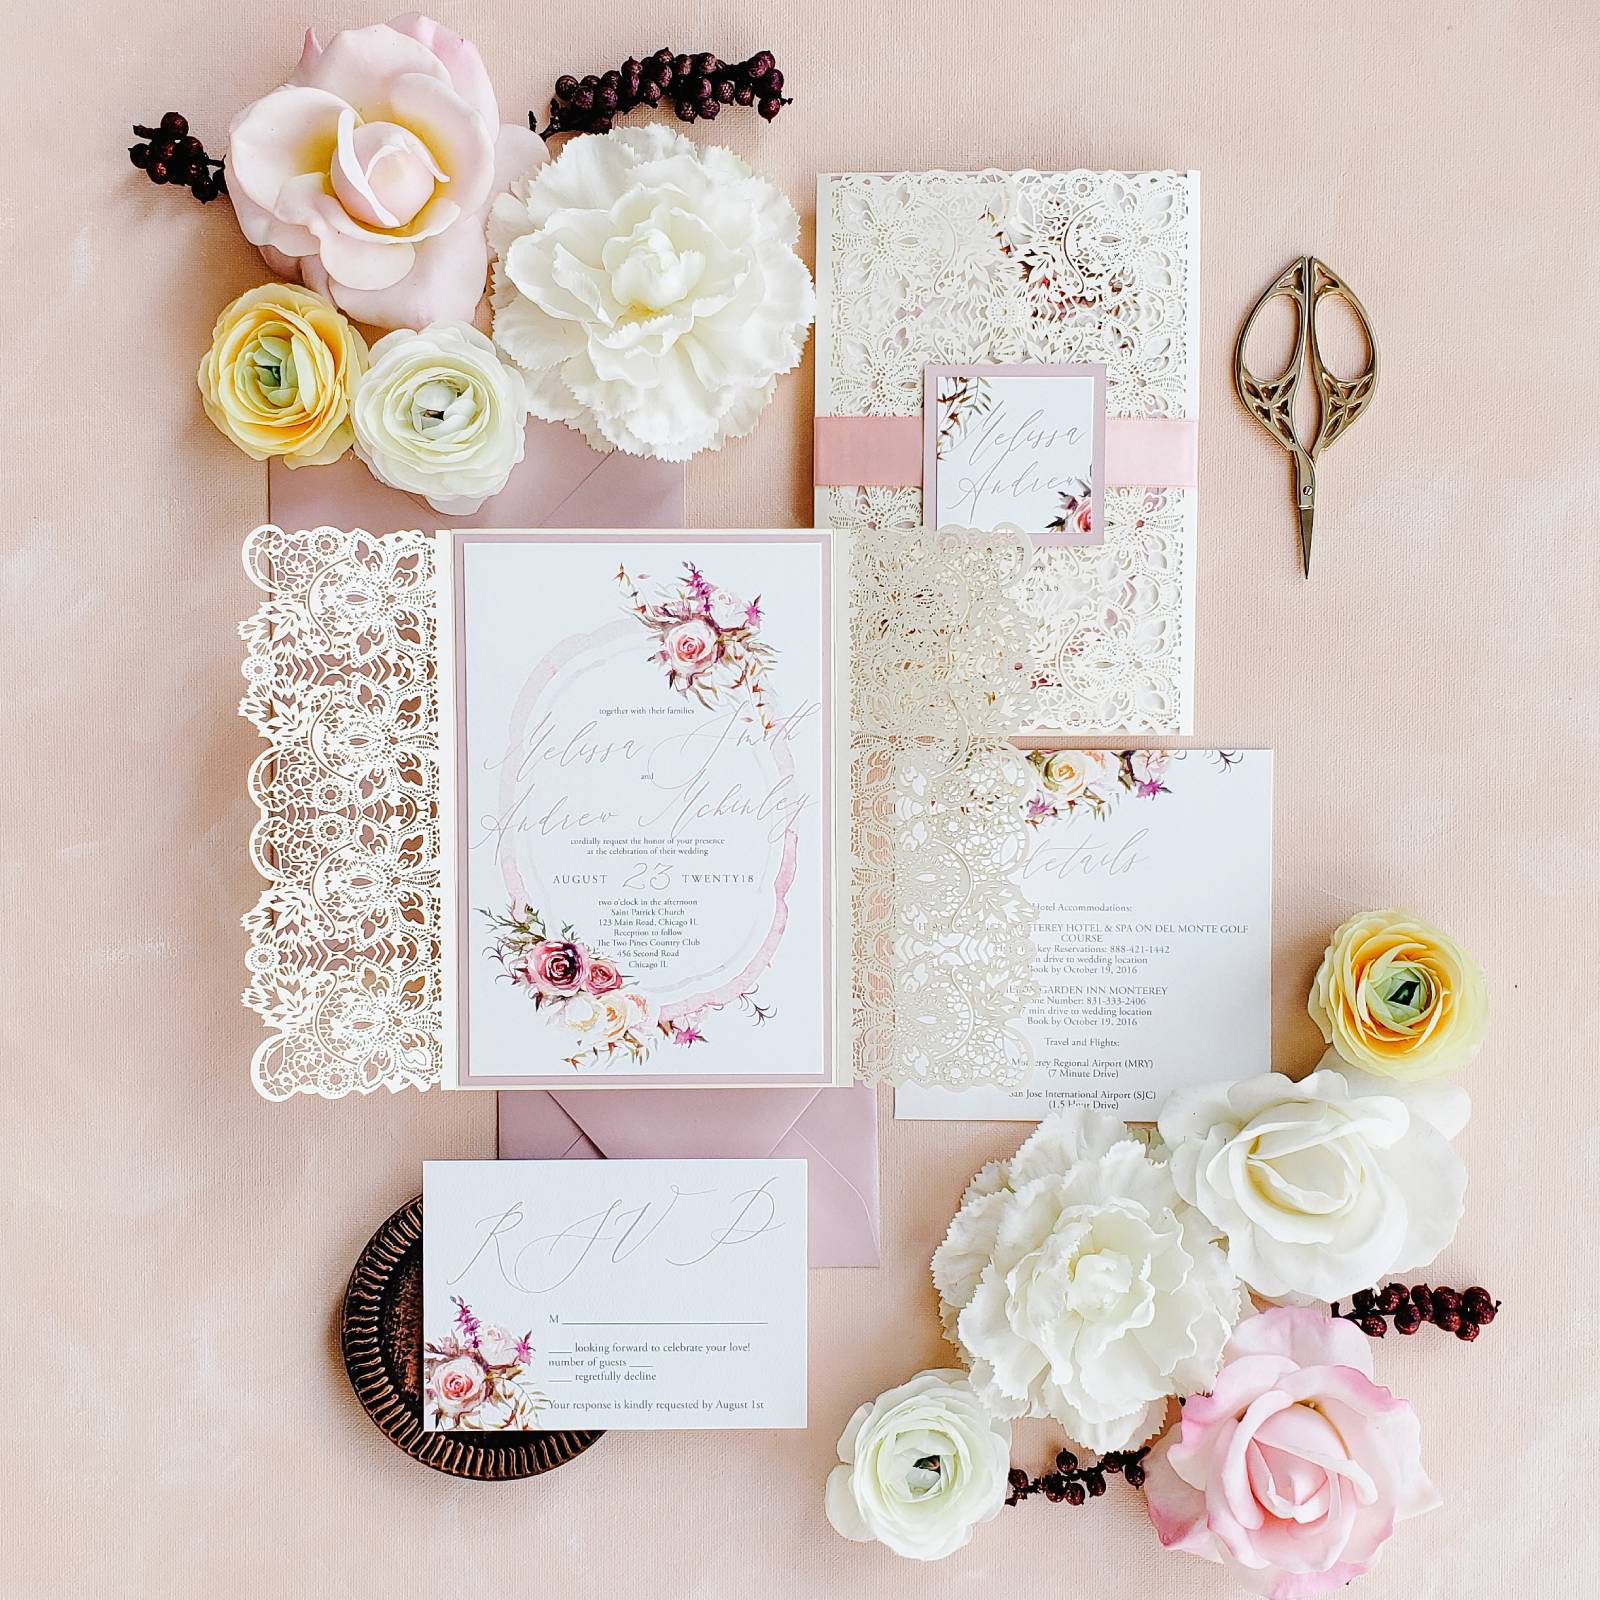 [vc_row][vc_column][vc_column_text]Purchase this listing to get a sample of our Enamoured wedding invitation suite.

The sample includes:

• 5